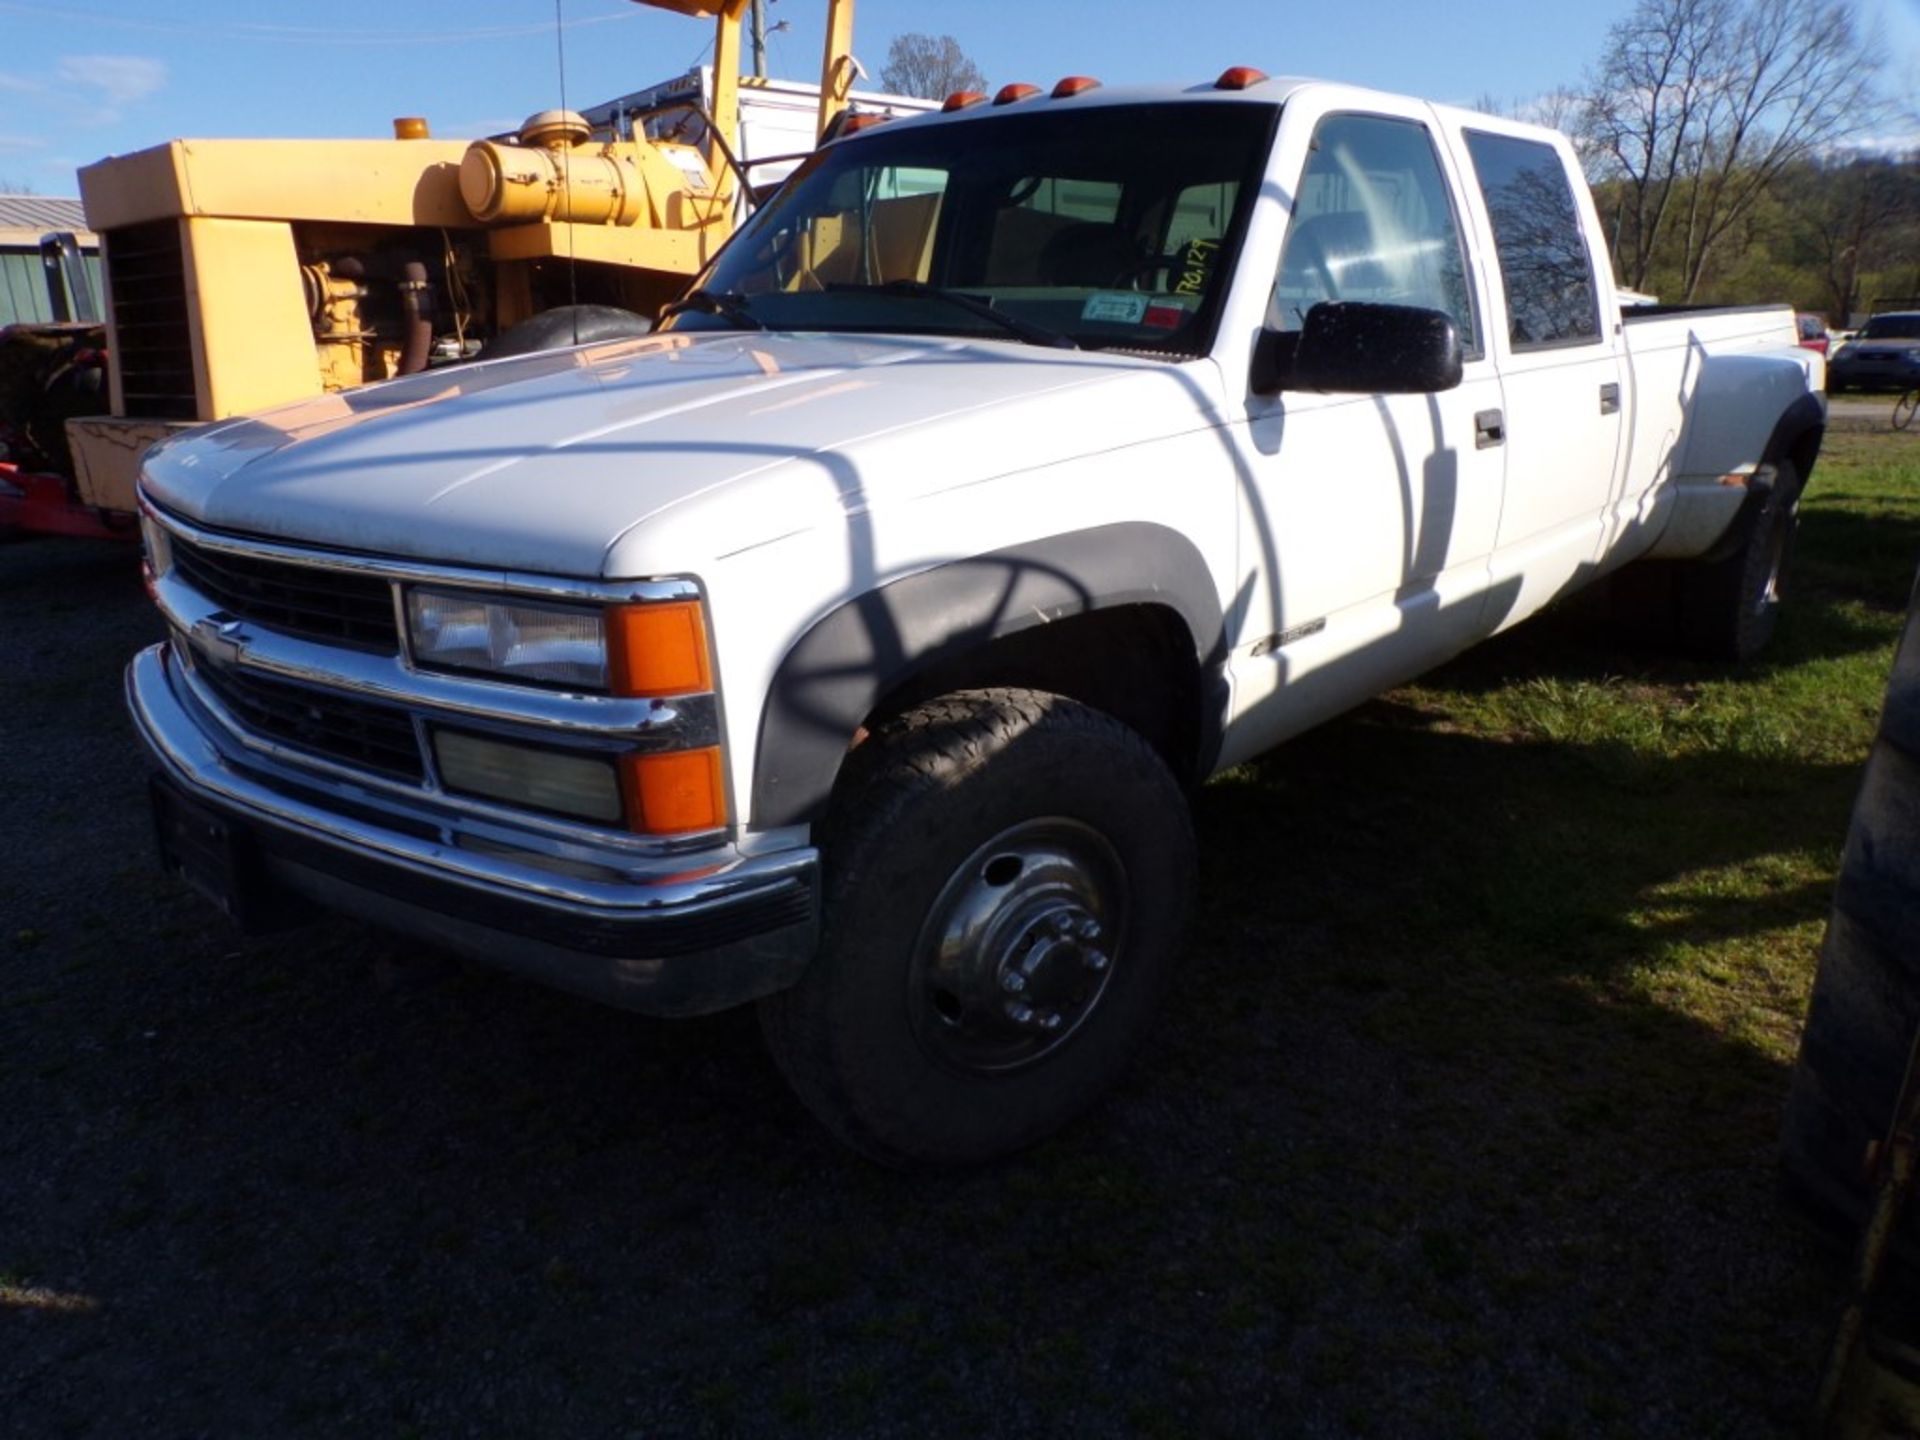 2000 Chevrolet 3500 Dually Crew Cab with 8' Box, Gas 5.7 V8, Auto, 4 WD, Has Rails for Hitch System, - Image 2 of 6